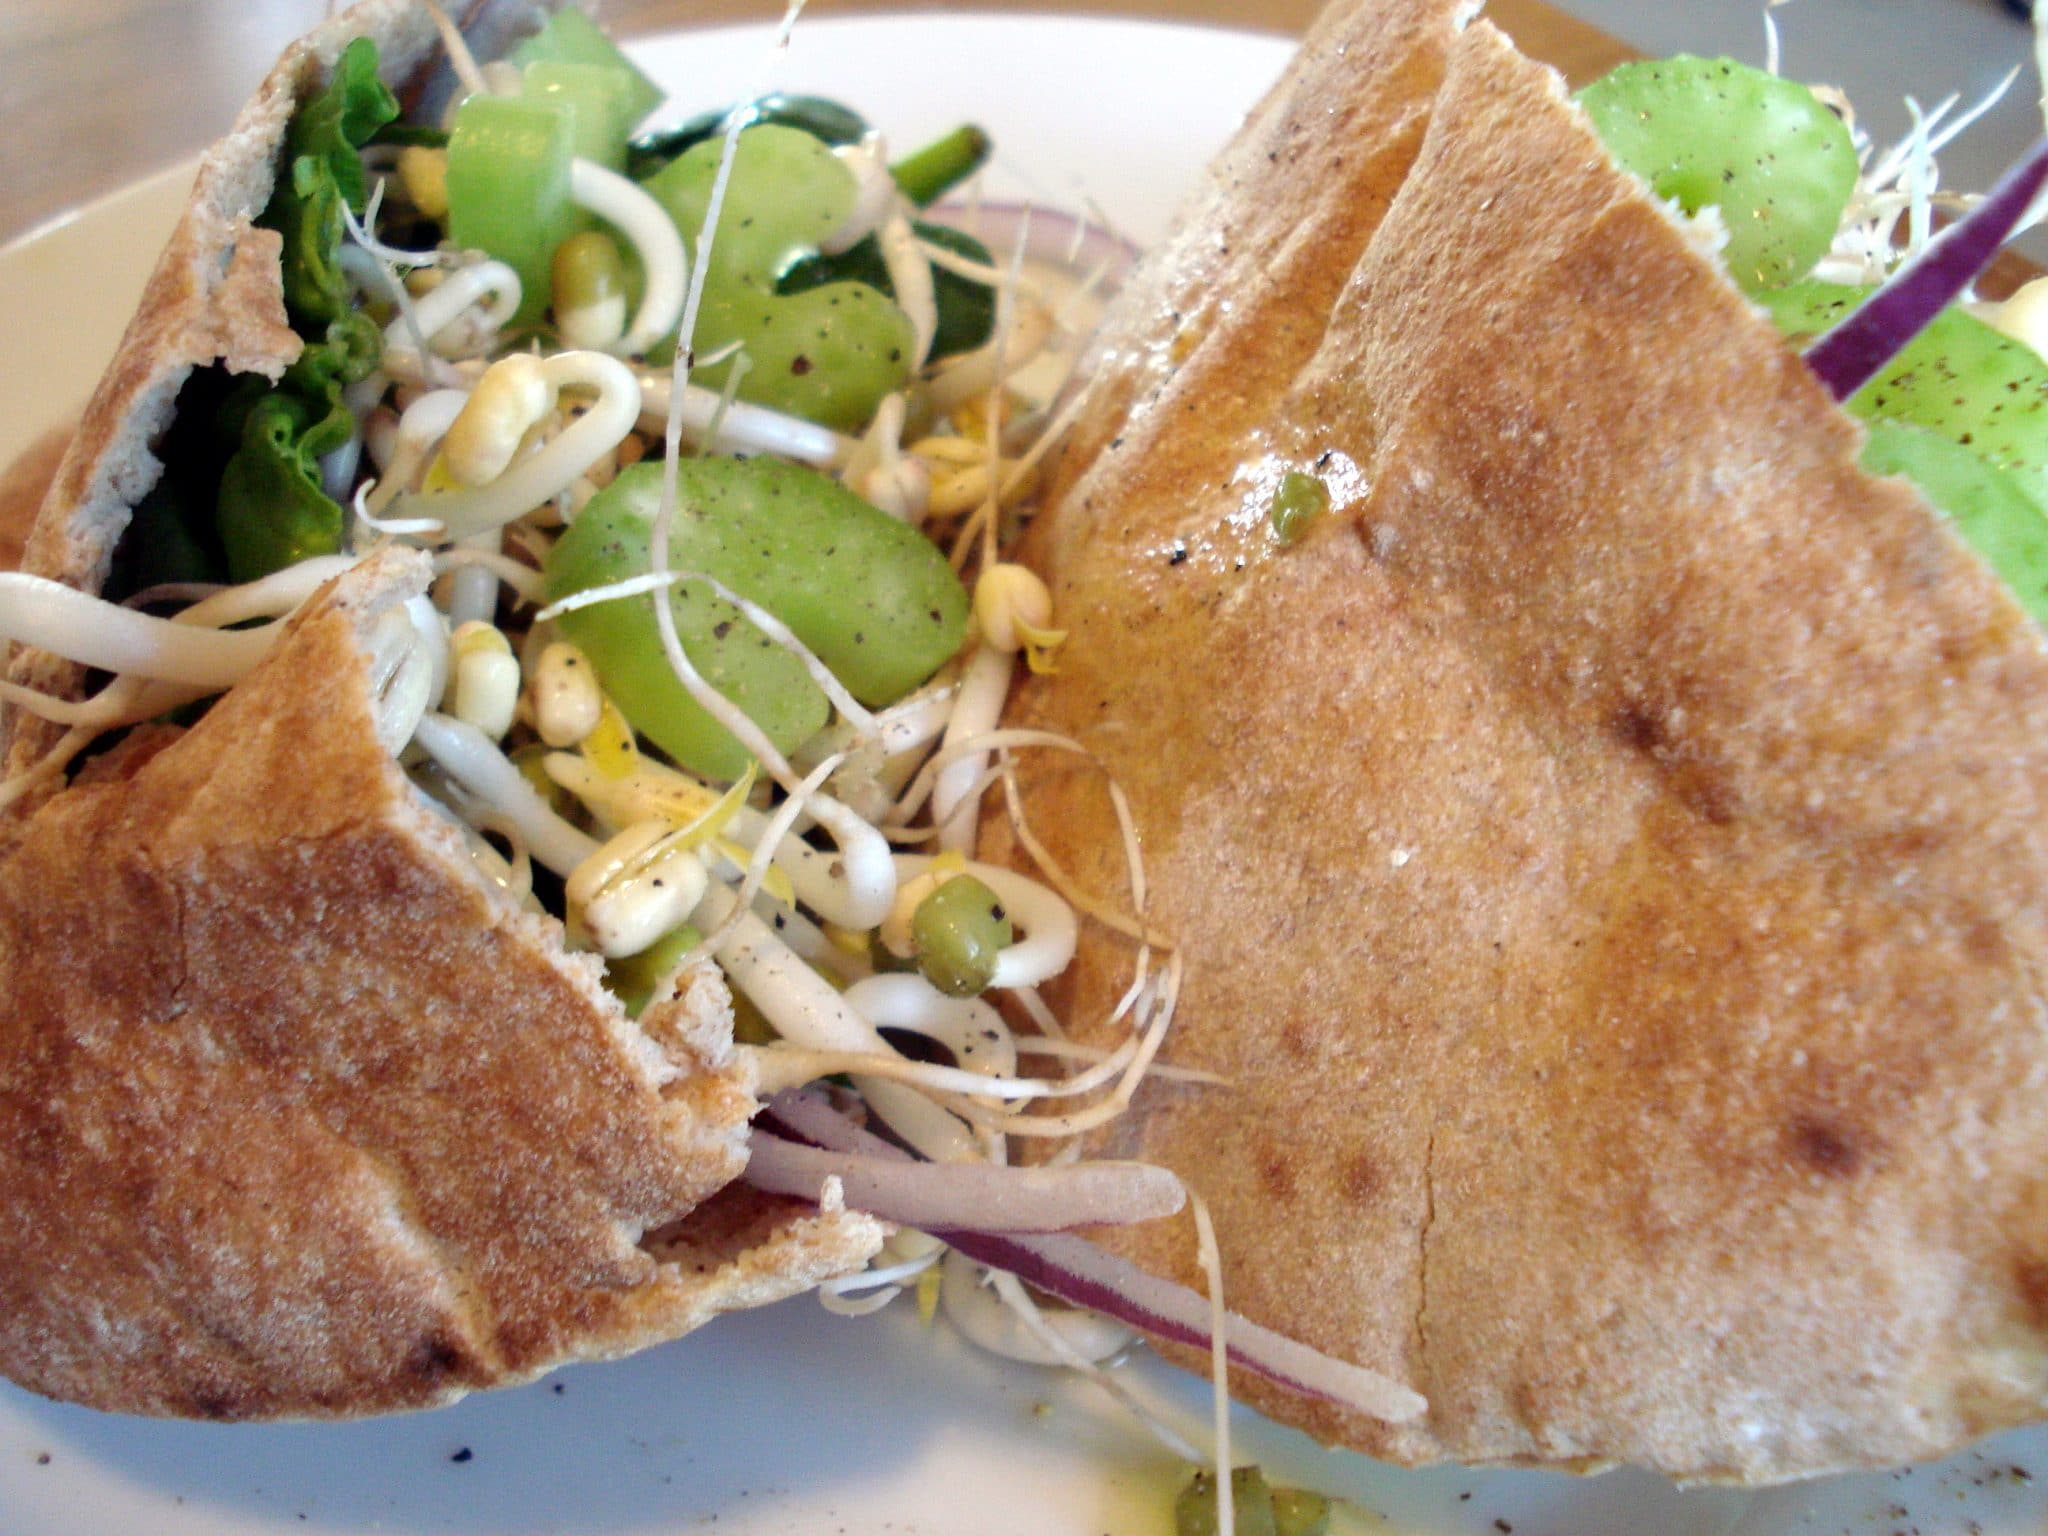 Pita sandwich with sprouted mung beans